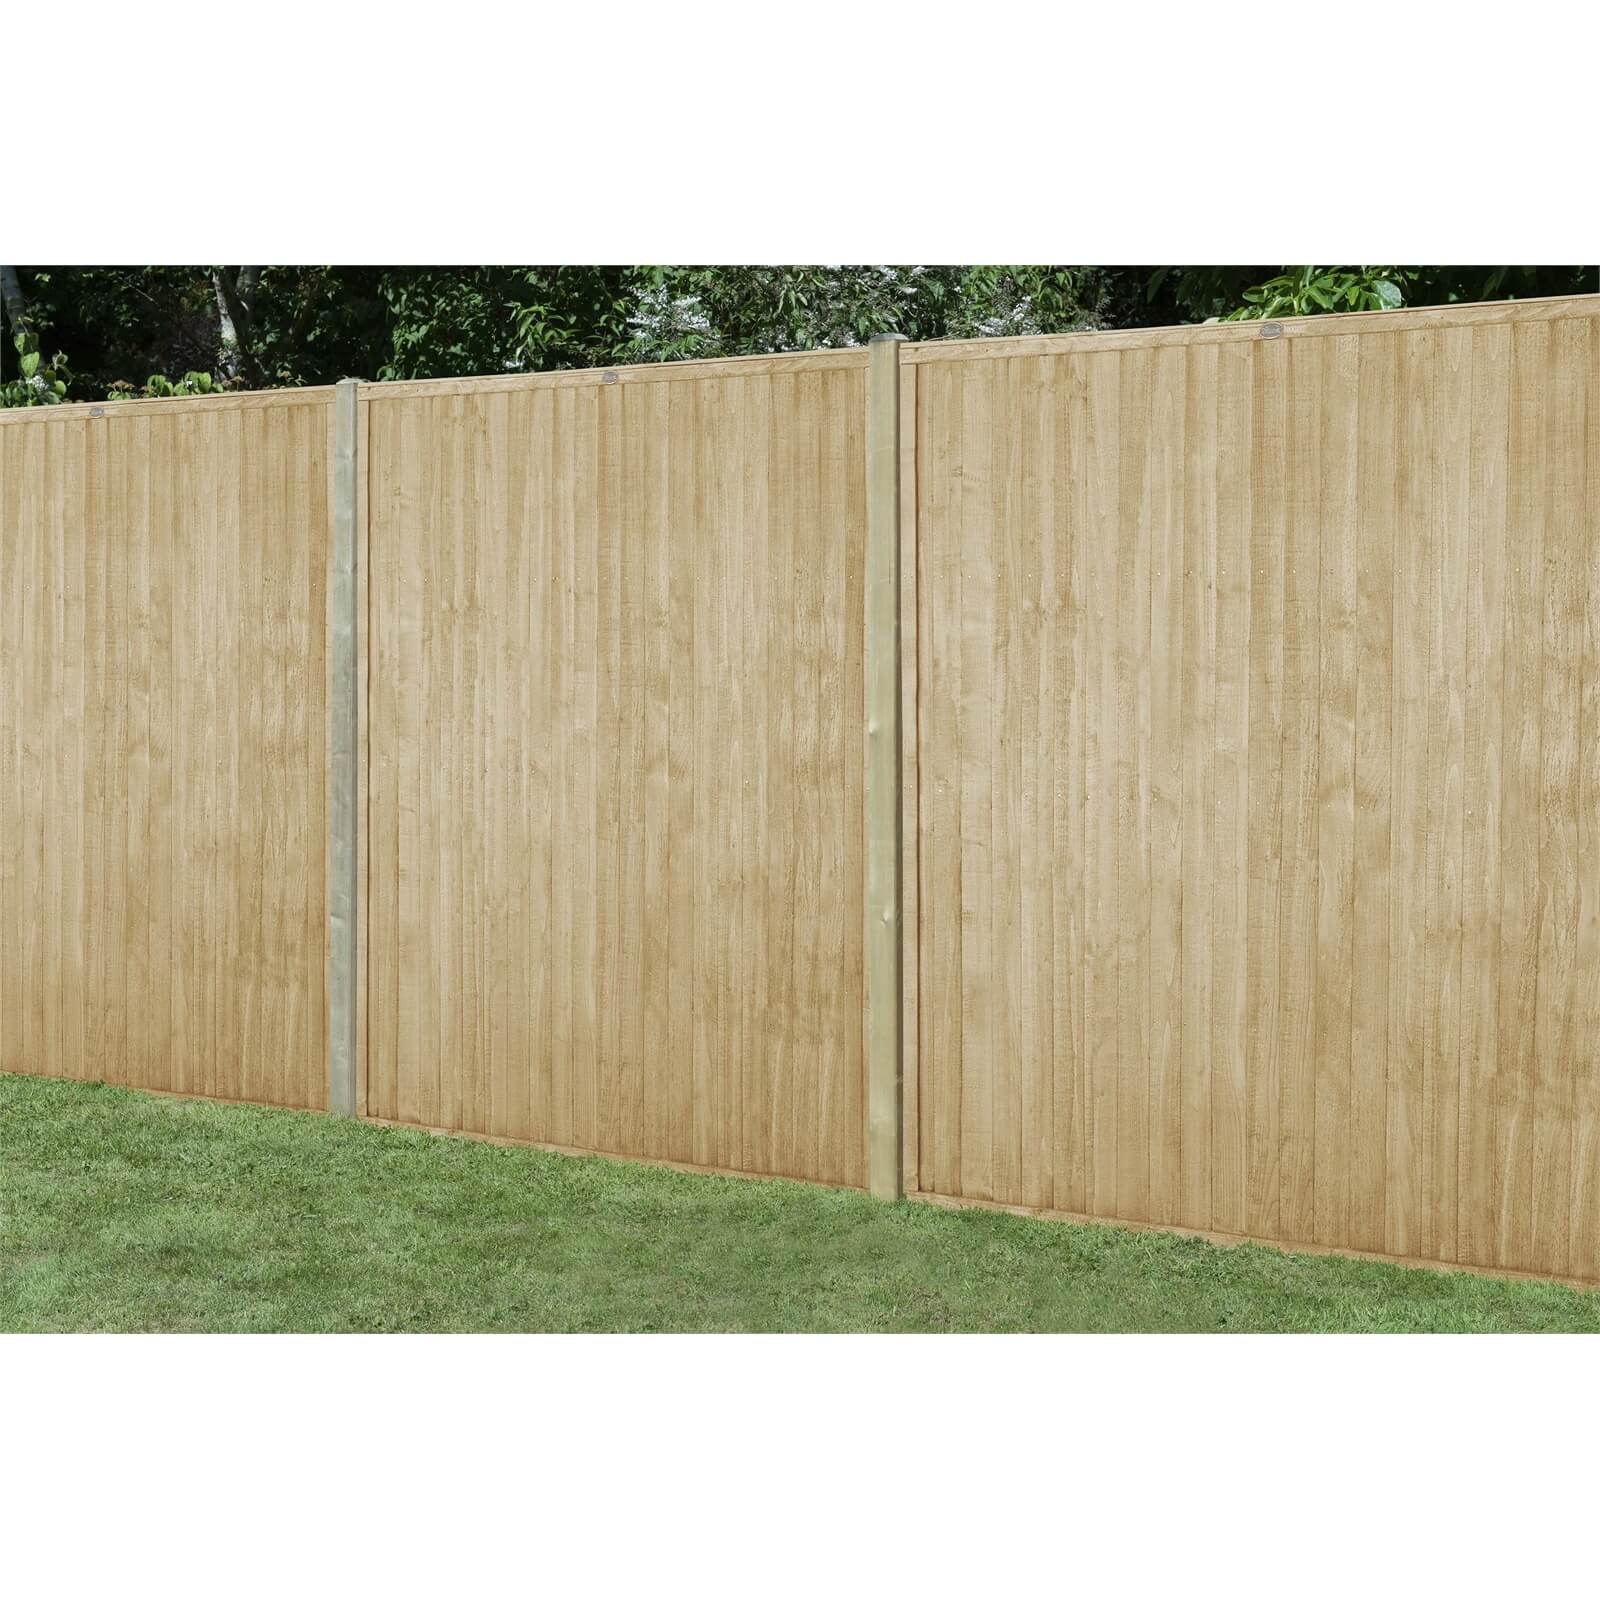 6ft x 6ft (1.83m x 1.83m) Pressure Treated Closeboard Fence Panel - Pack of 5